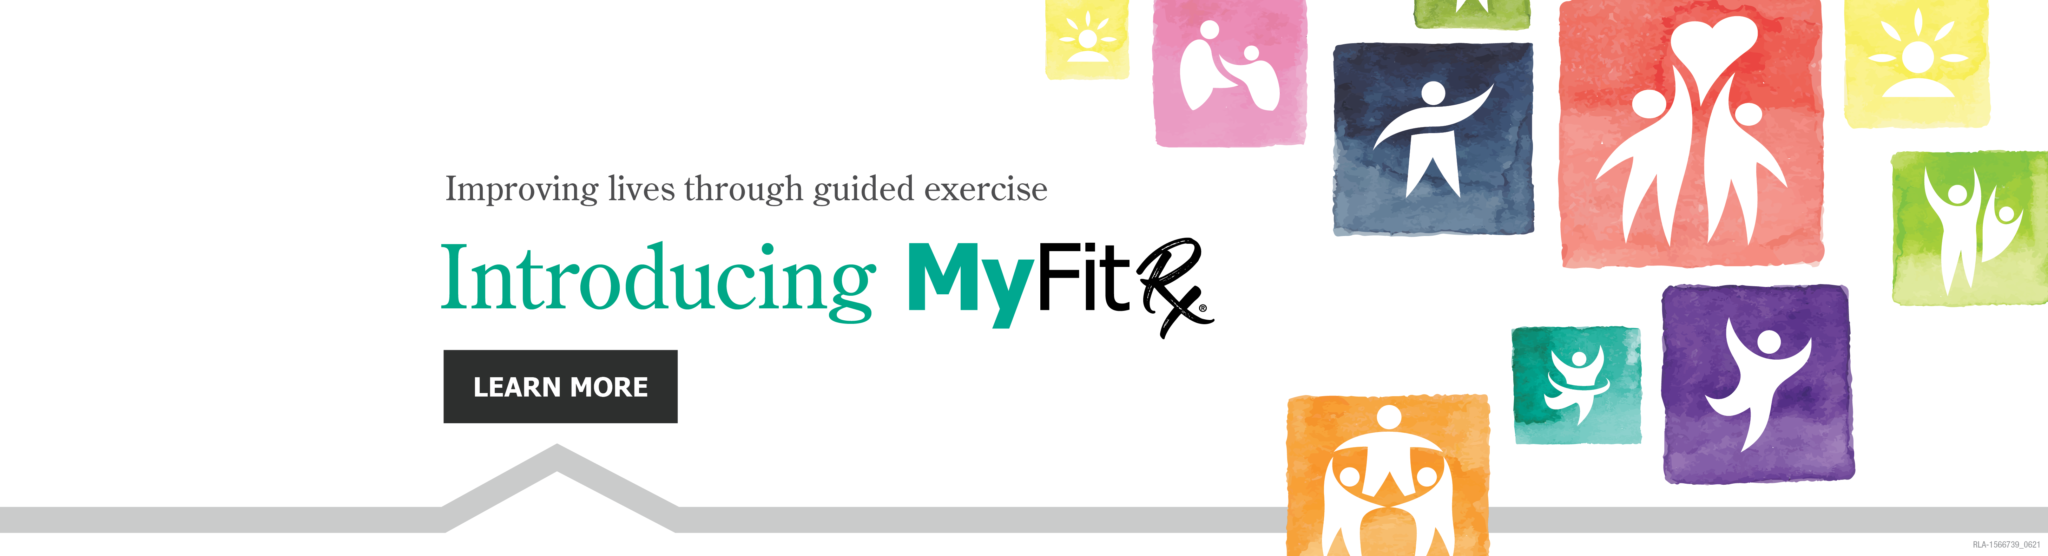 Improving lives through guided exercise Introducing MyFitRx®